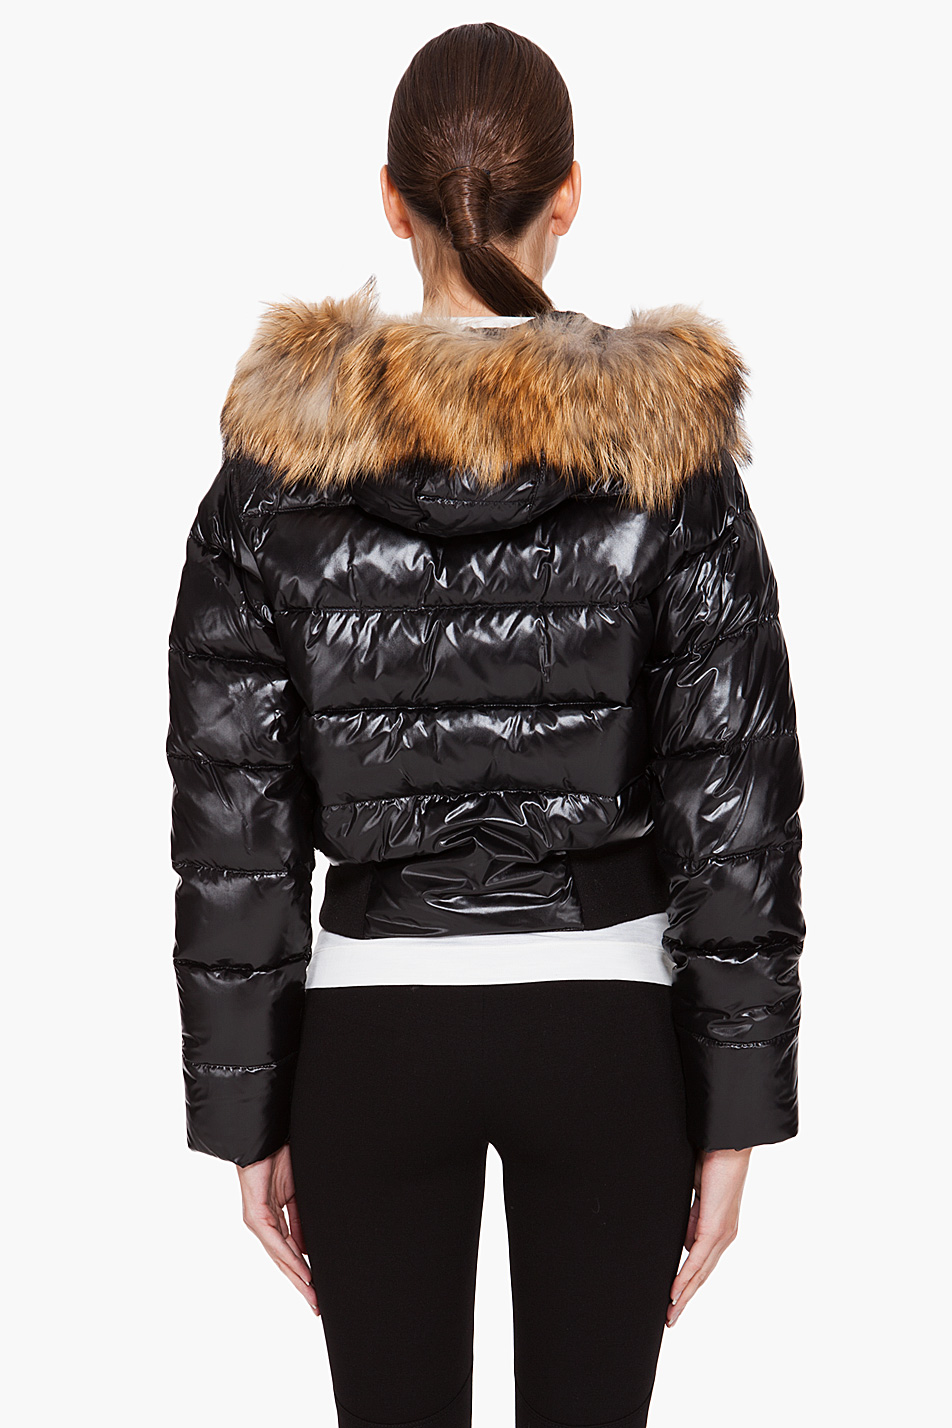 Moncler Goose 'armoise' Padded Jacket in Charcoal (Black) - Lyst